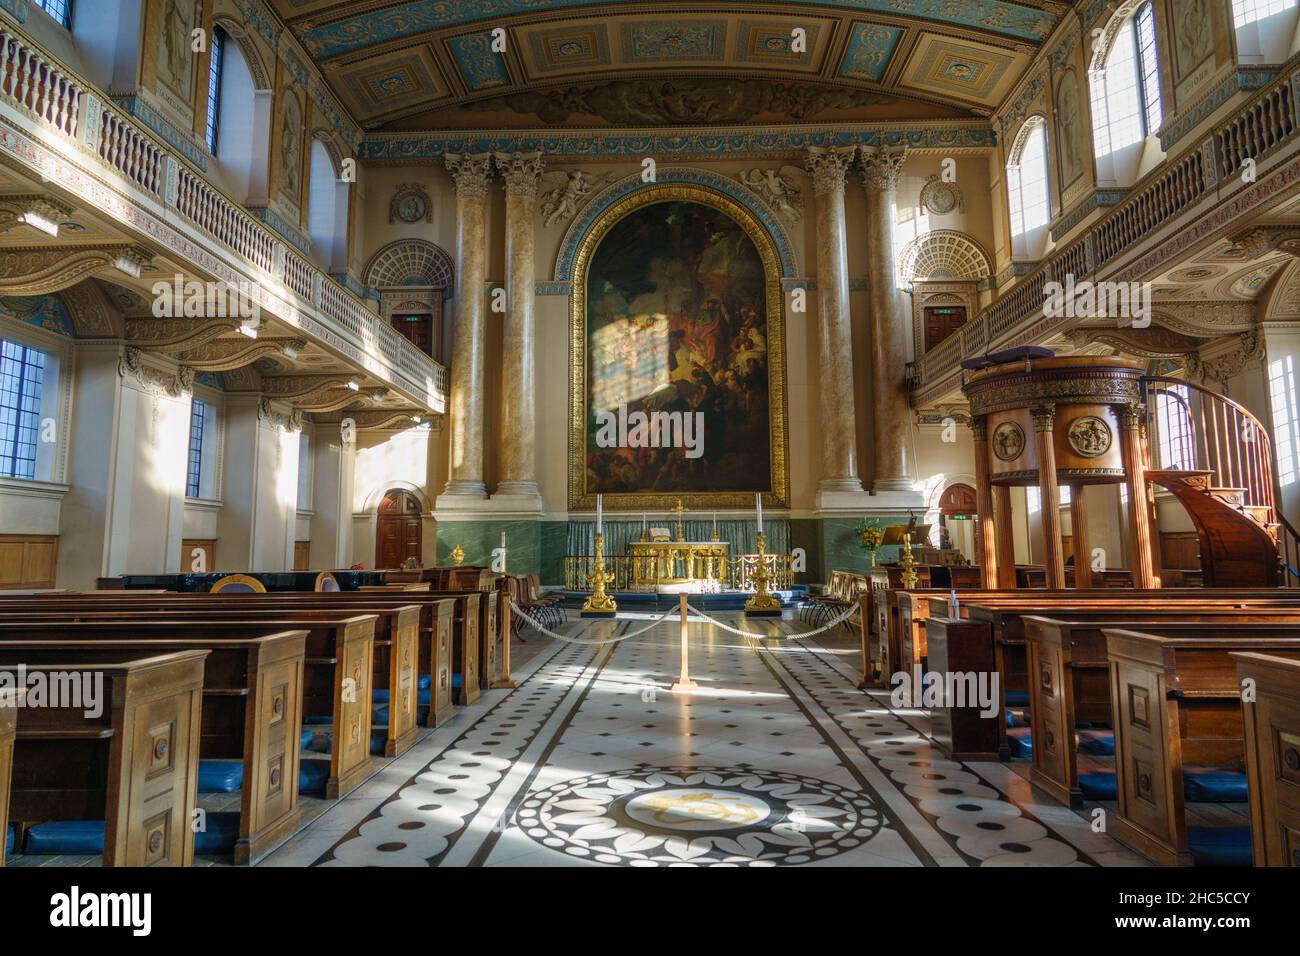 Interior of the church. Chapel of St Peter and St Paul, Old Royal Naval College, Greenwich, London. Altarpiece artwork by Benjamin West. Stock Photo